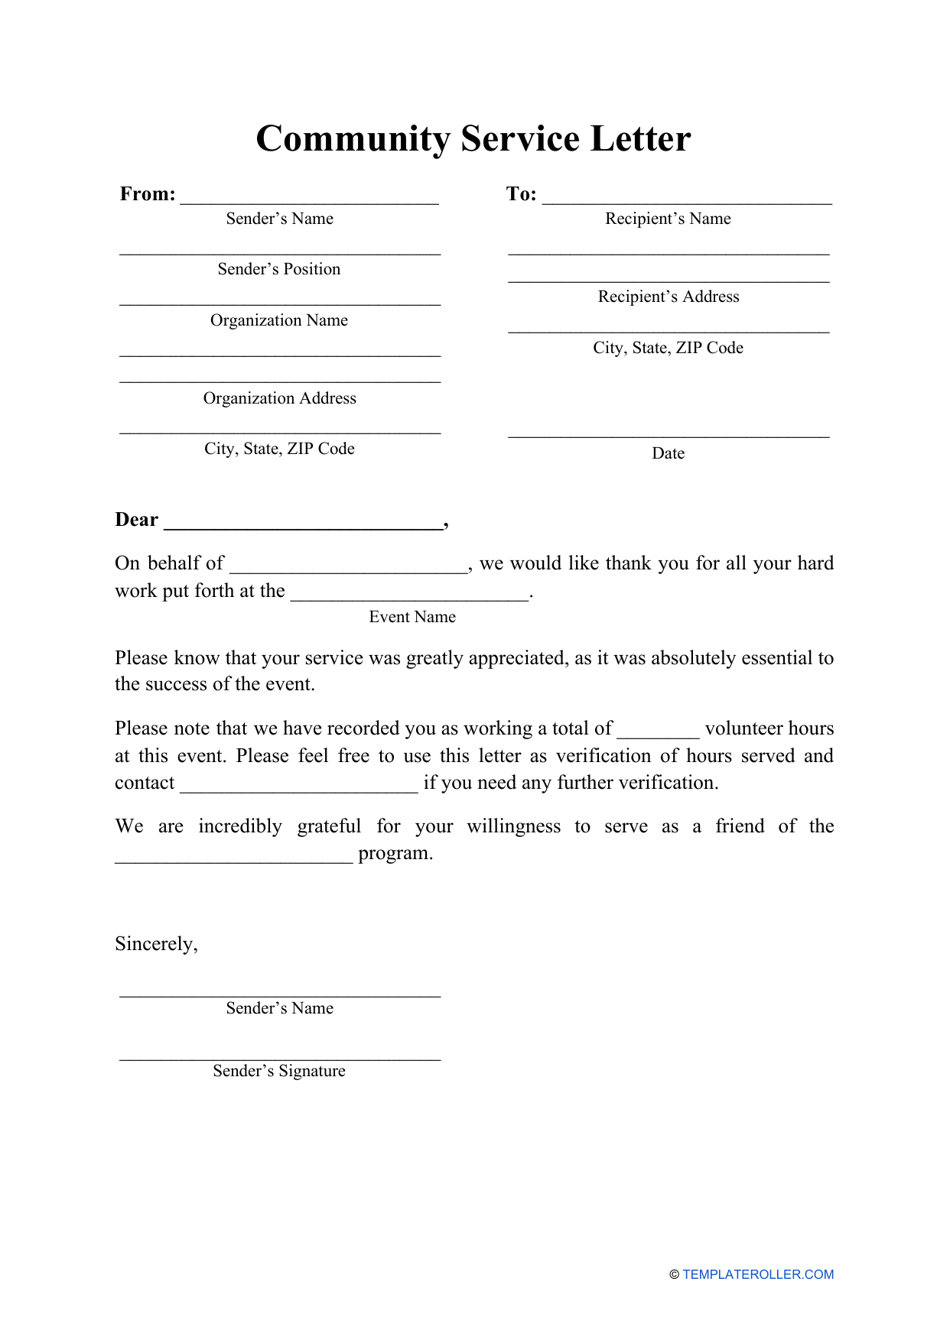 community-service-letter-template-download-printable-pdf-templateroller